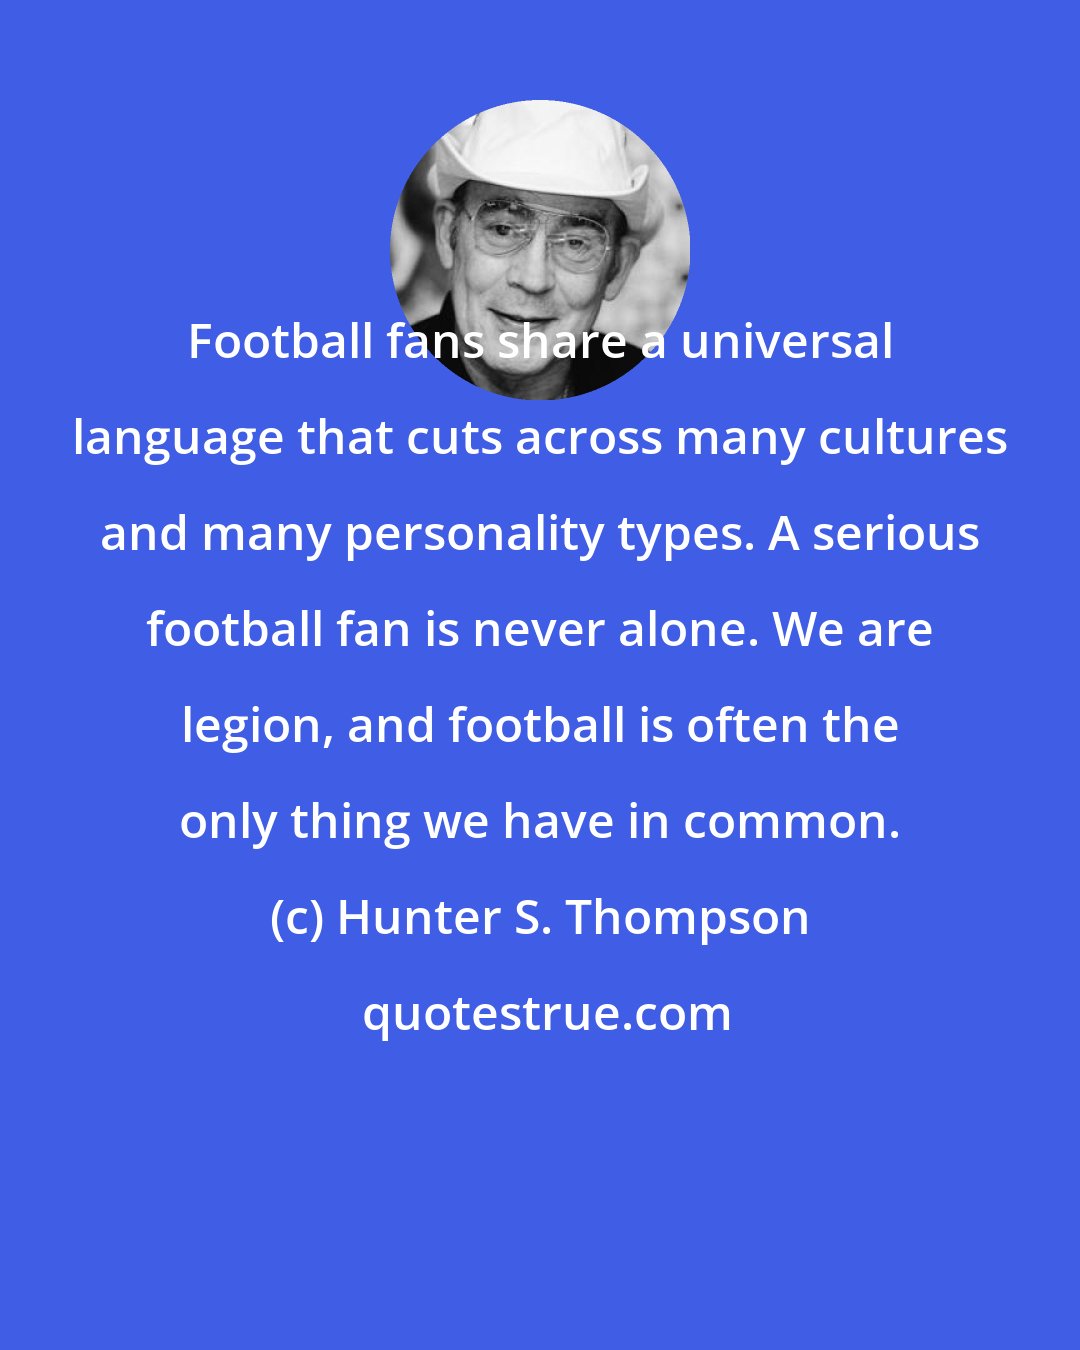 Hunter S. Thompson: Football fans share a universal language that cuts across many cultures and many personality types. A serious football fan is never alone. We are legion, and football is often the only thing we have in common.